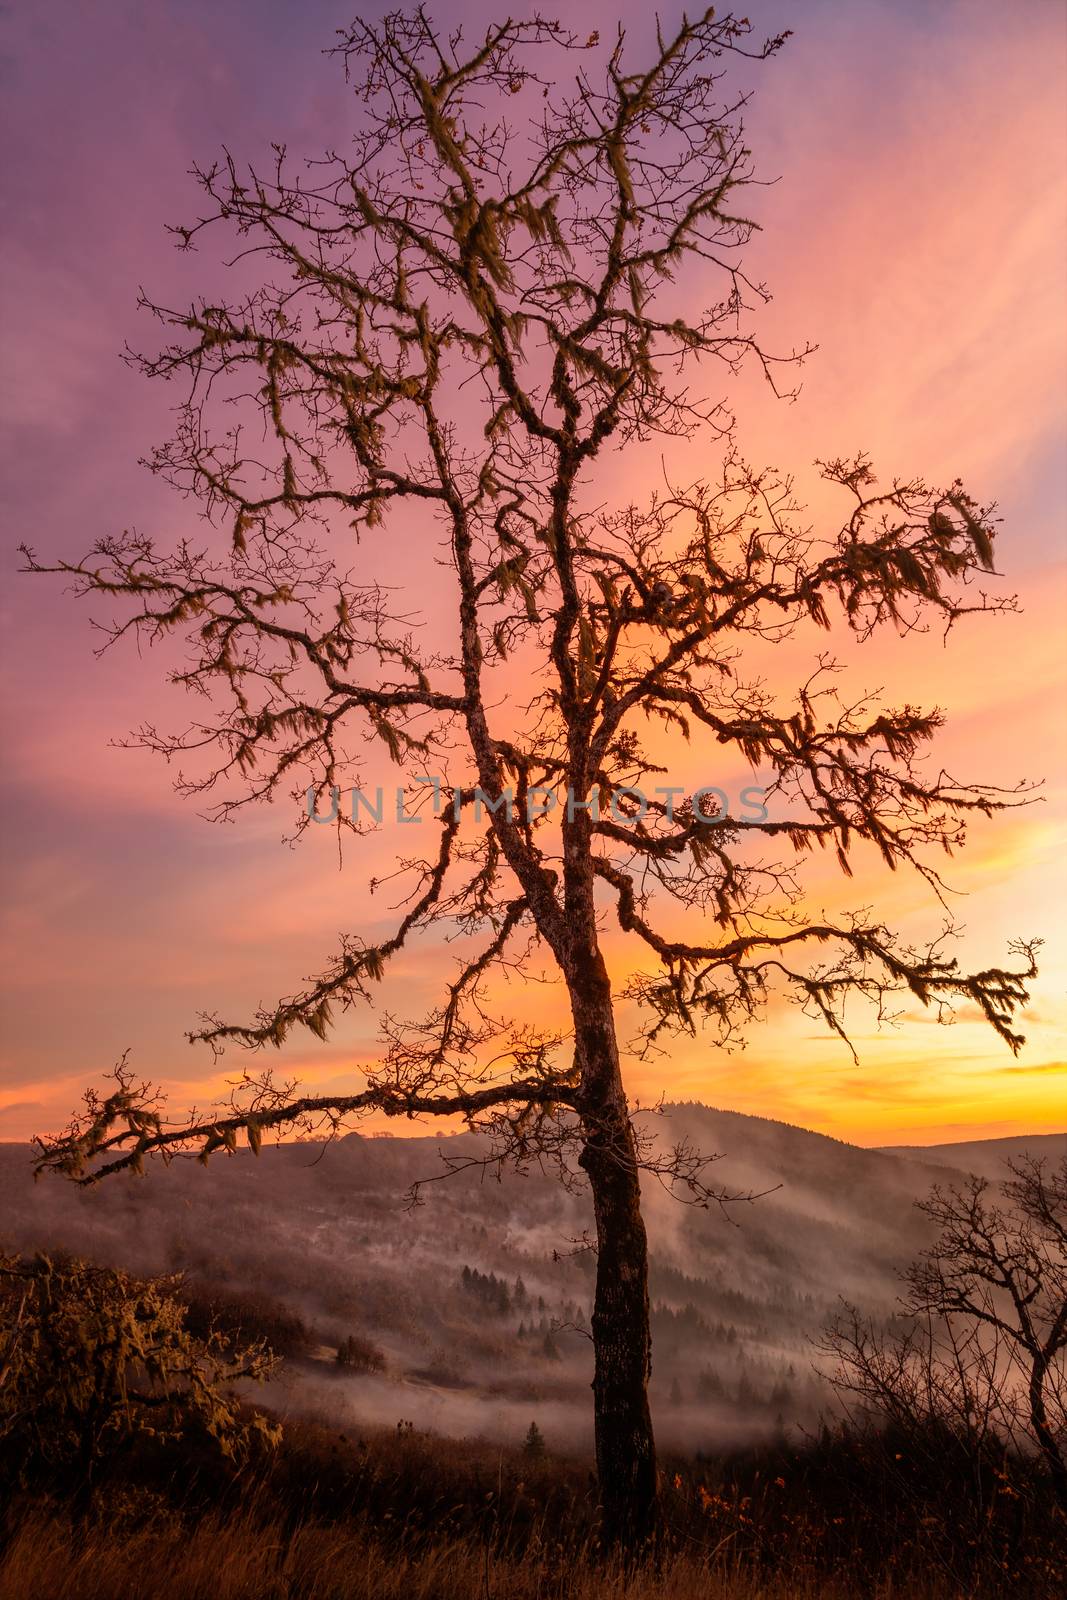 Lone Tree Watching Over the Valley at Sunset by backyard_photography